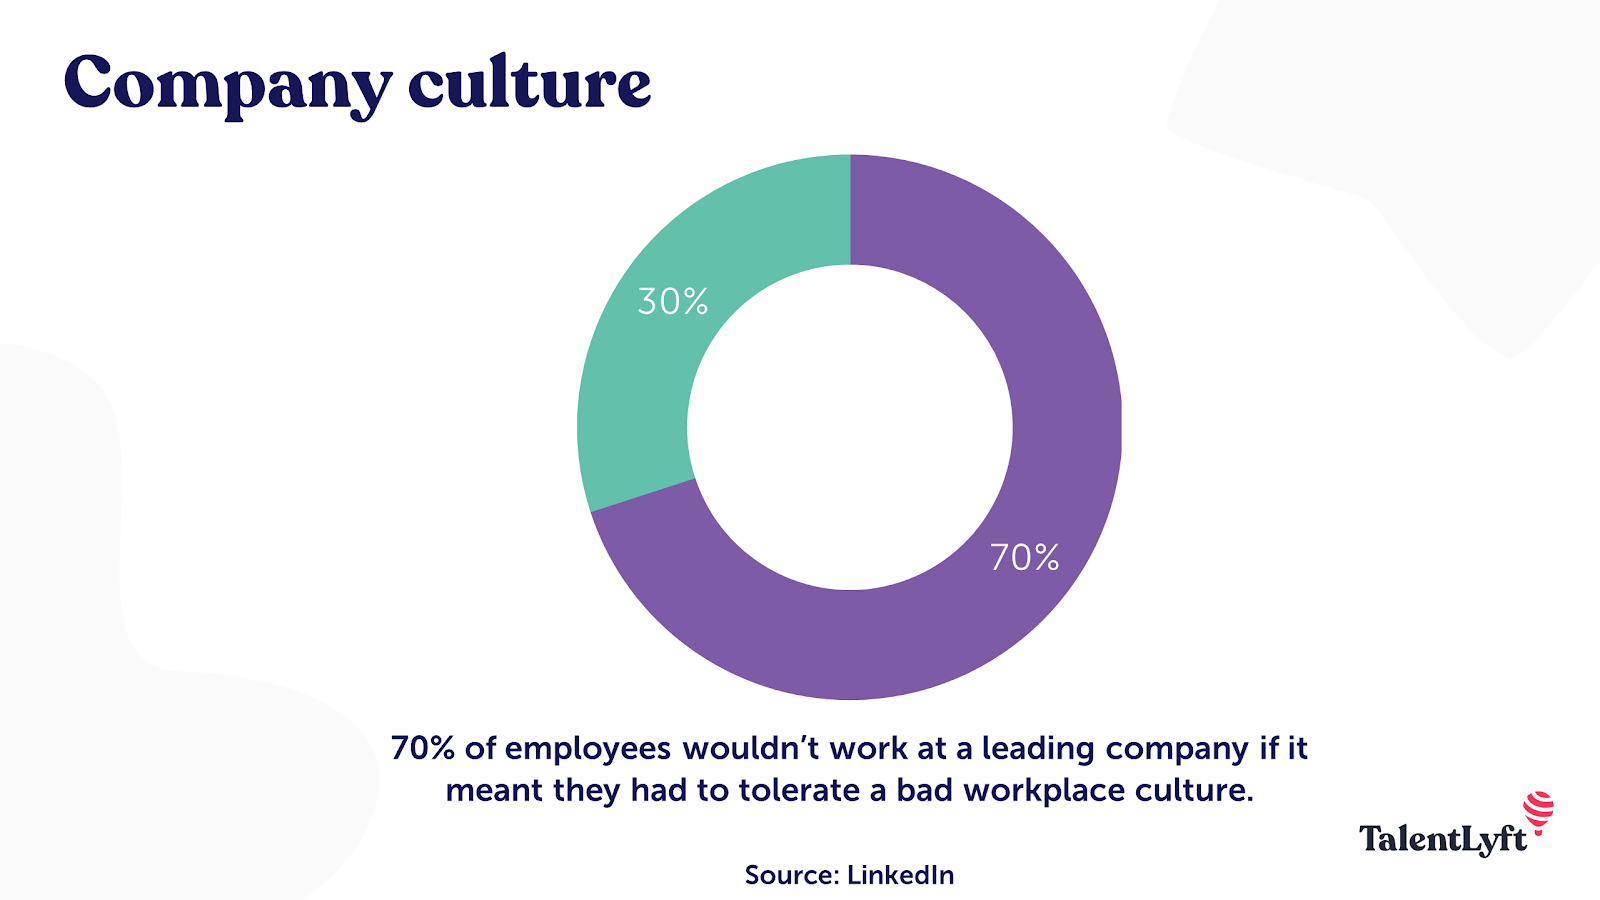 Company culture importance for job seekers